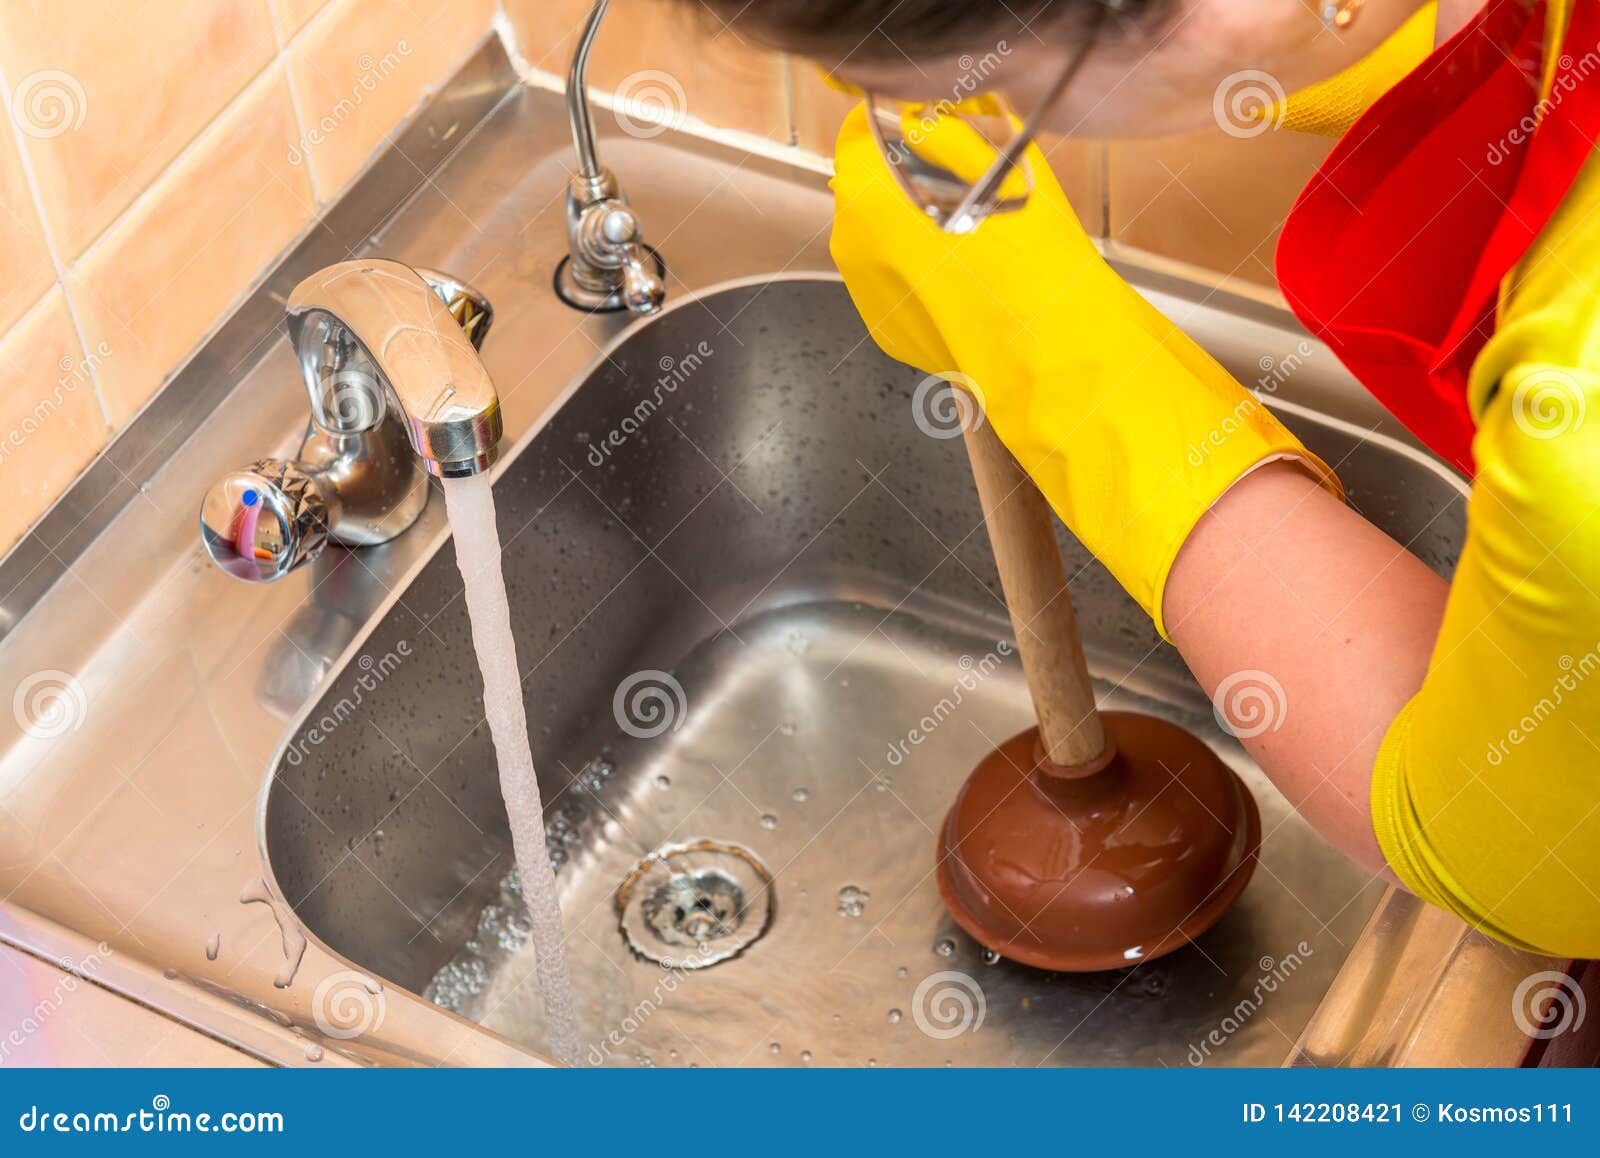 Cleaning Clogged Pipes In The Kitchen Sink Stock Image Image Of Clogged